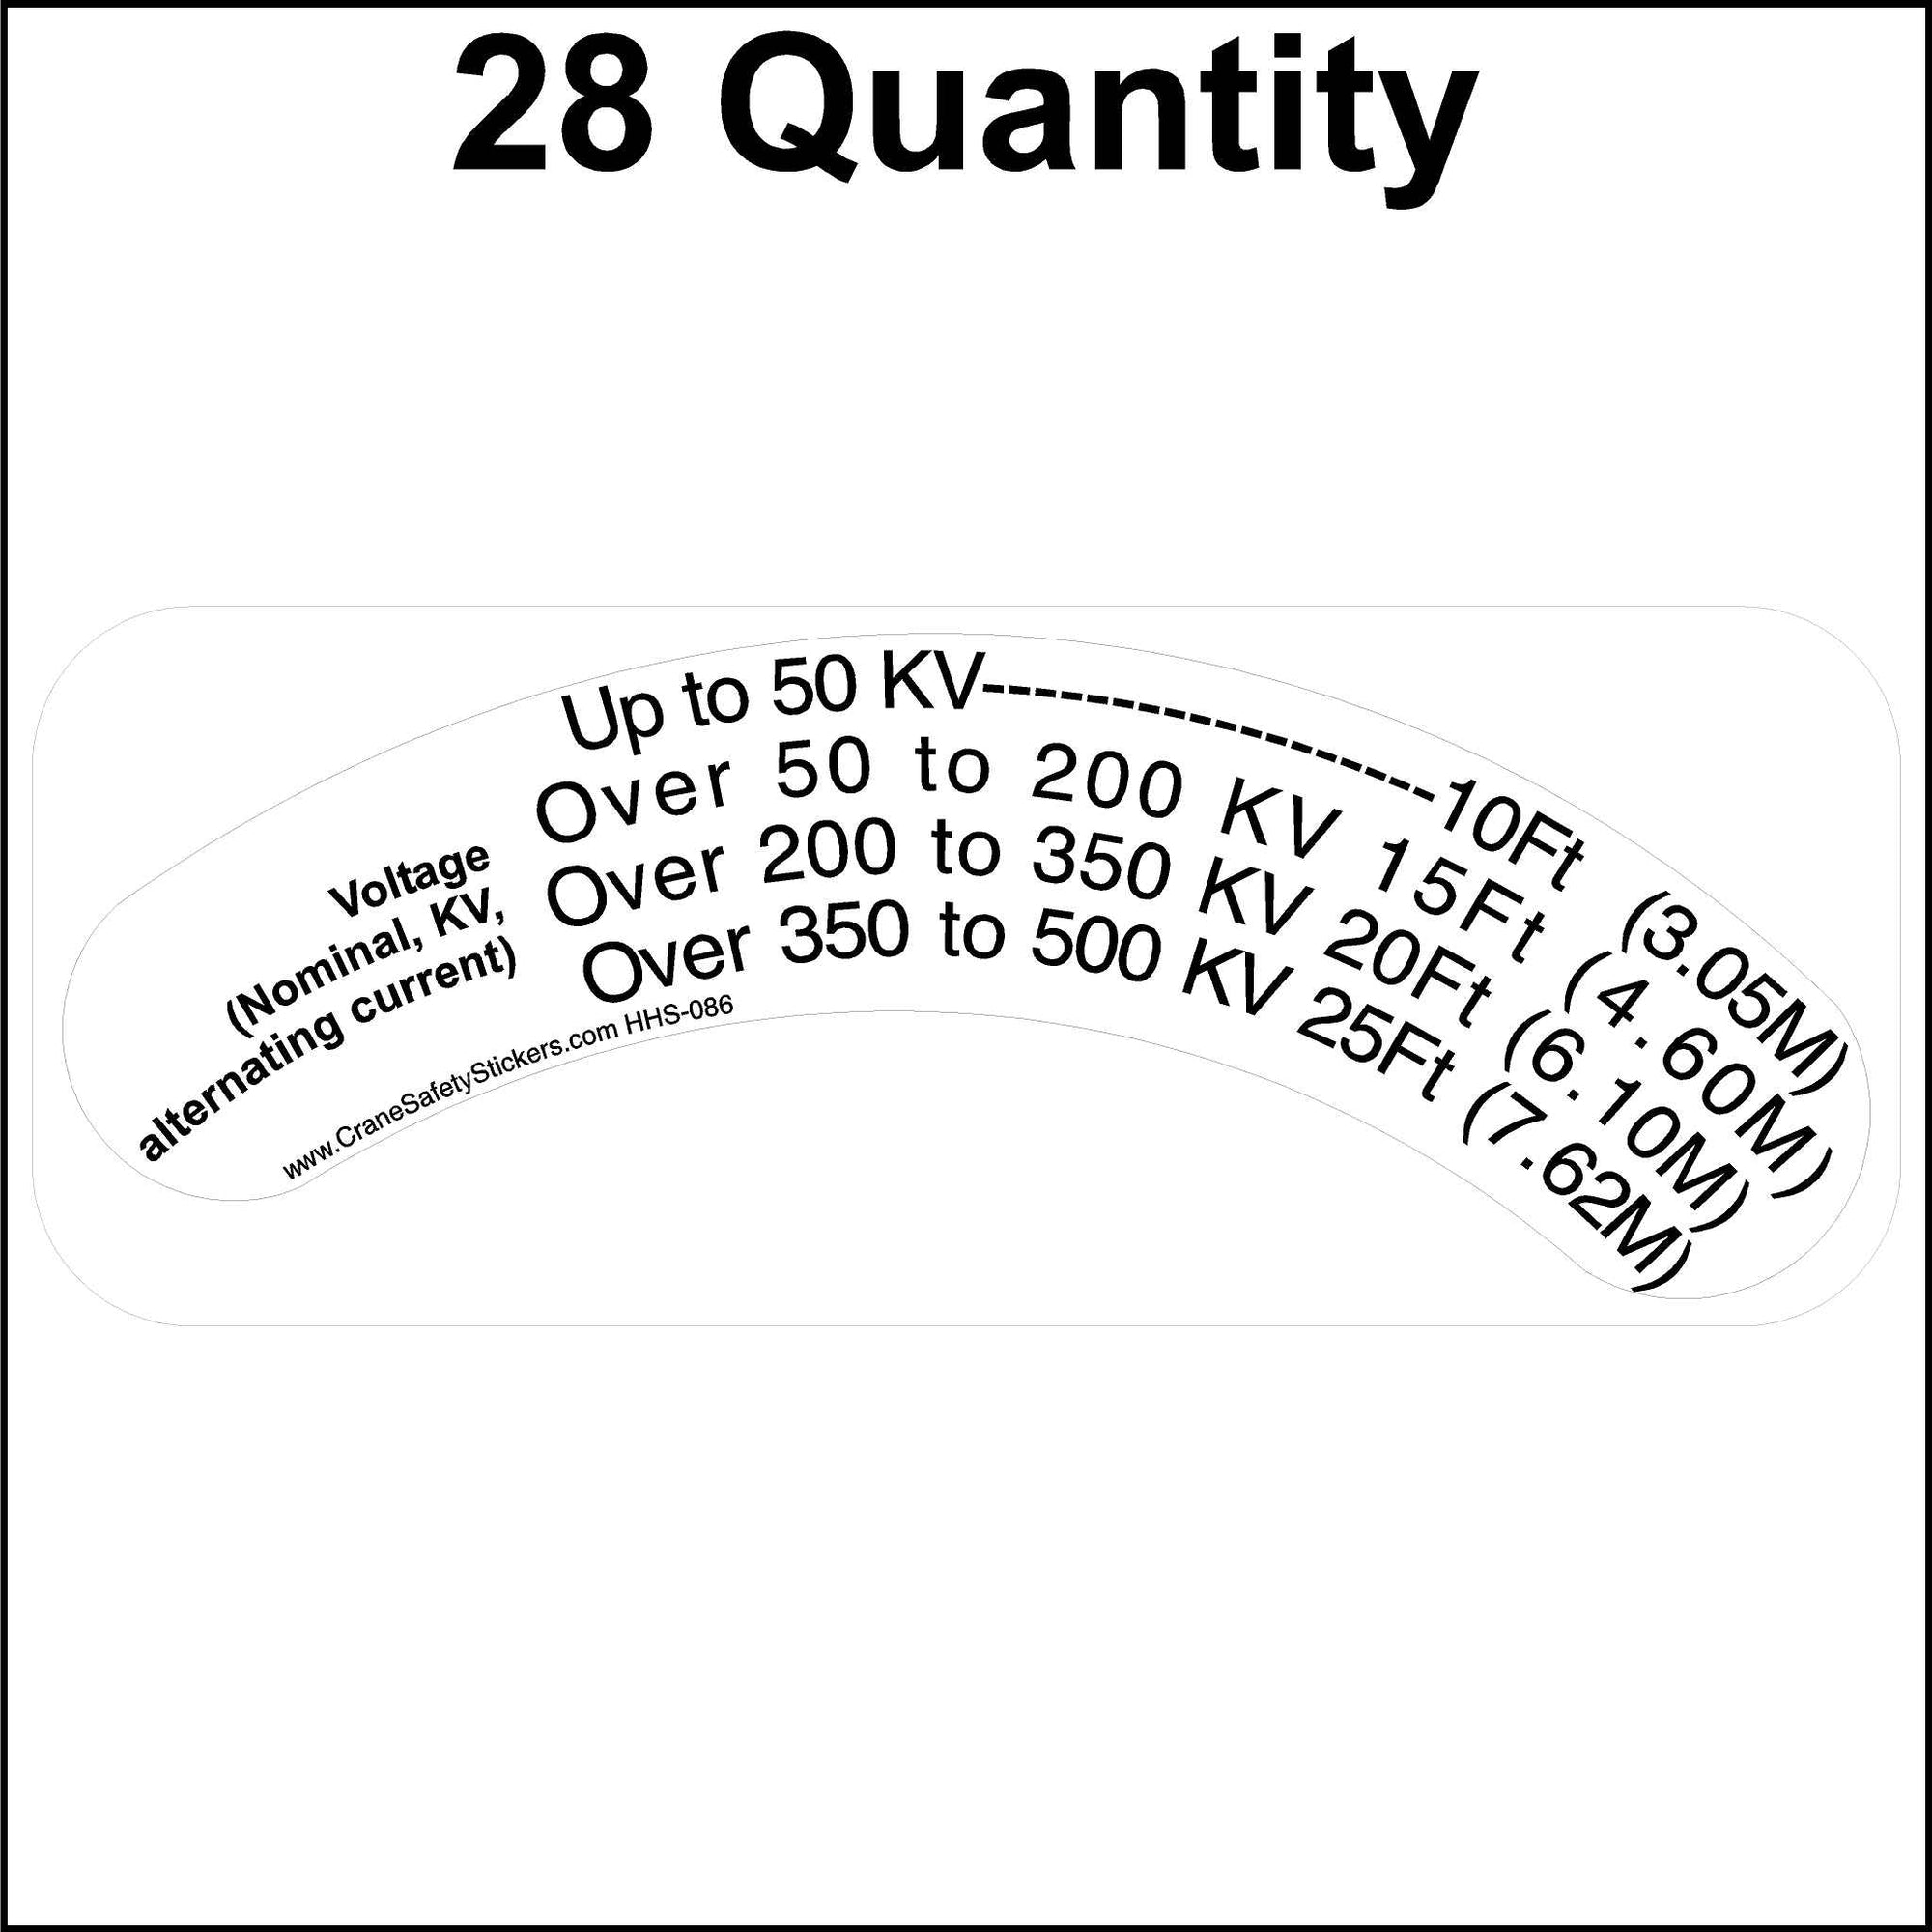 Hard hat brim decal with the powerline clearance chart printed on it. This decal is to be installed under the brim of the hat.